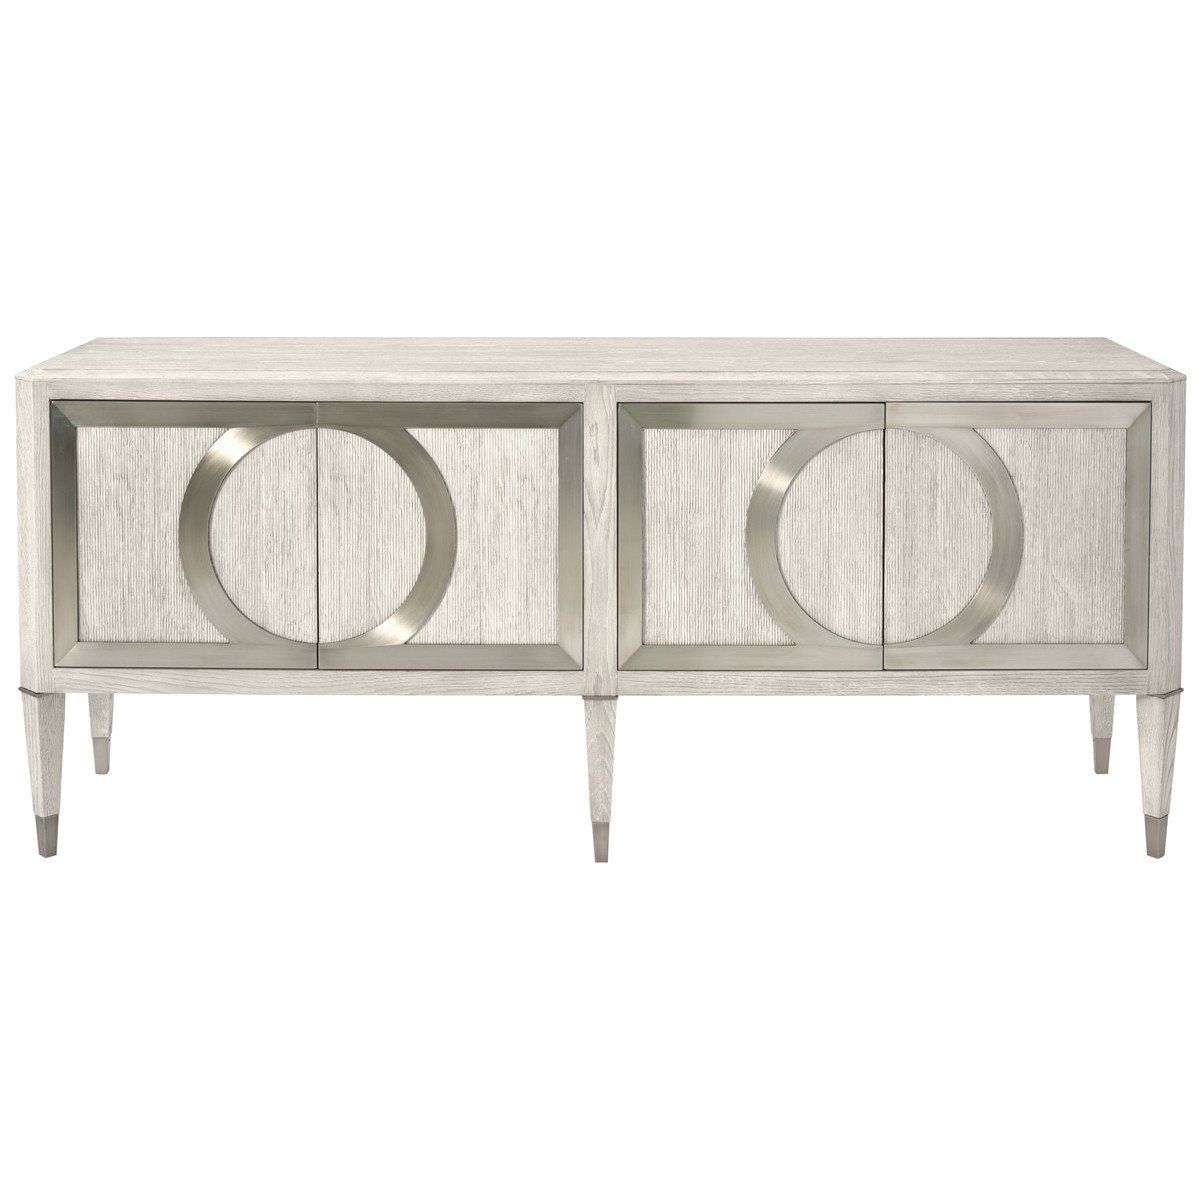 Bernhardt Domaine Blanc Dove White Entertainment Console Intended For Current Ethelinda Media Credenzas (View 13 of 20)